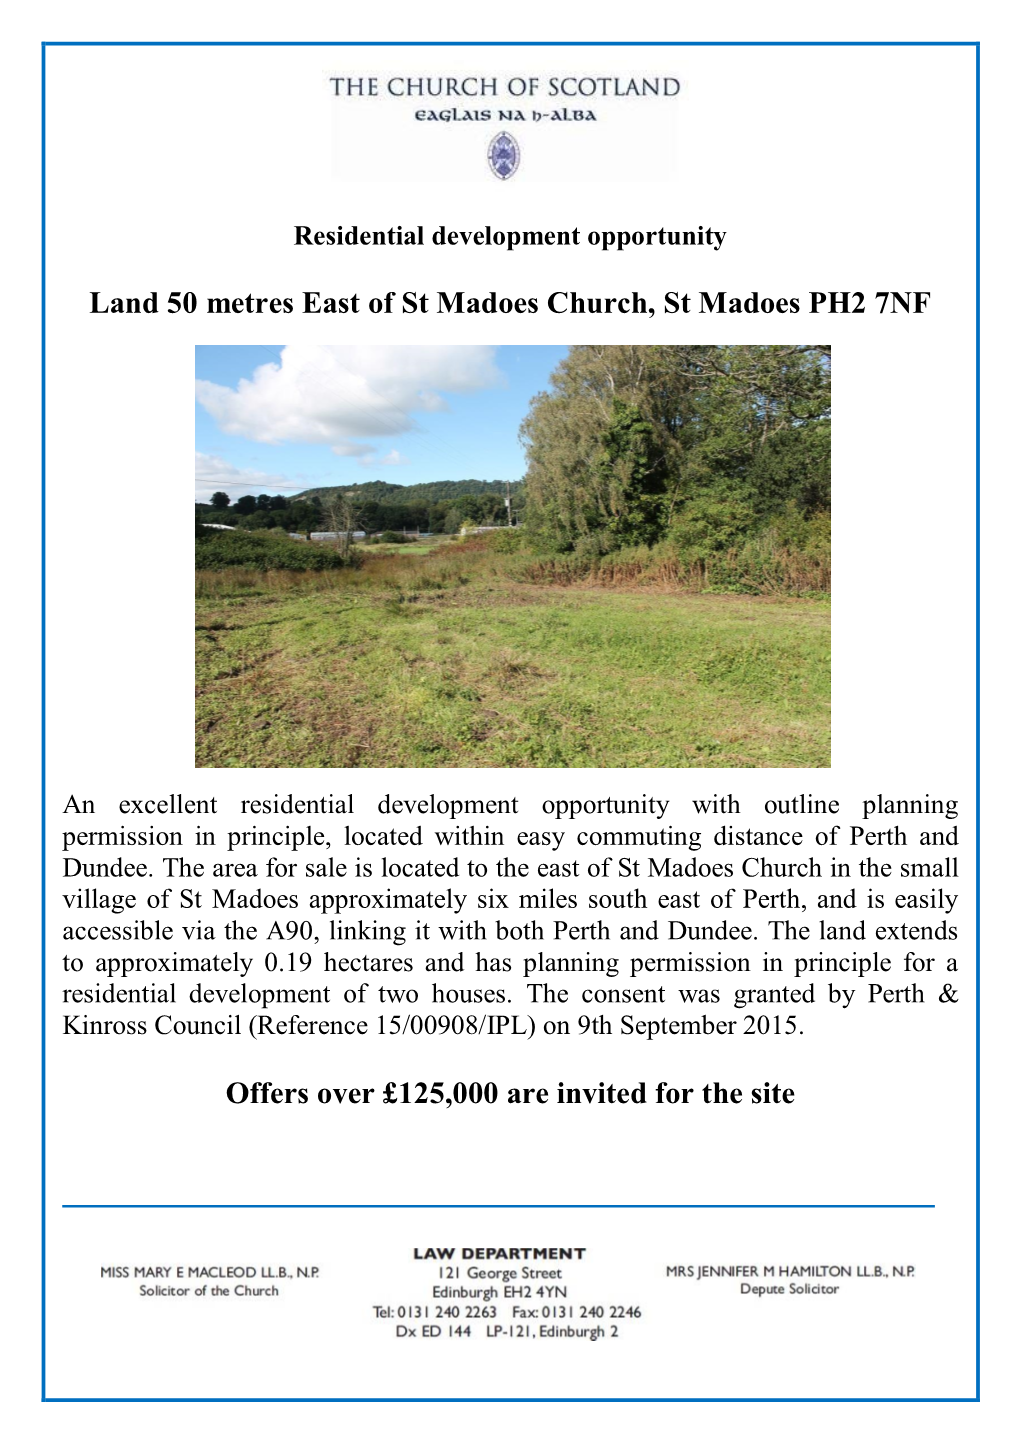 Land 50 Metres East of St Madoes Church, St Madoes PH2 7NF Offers